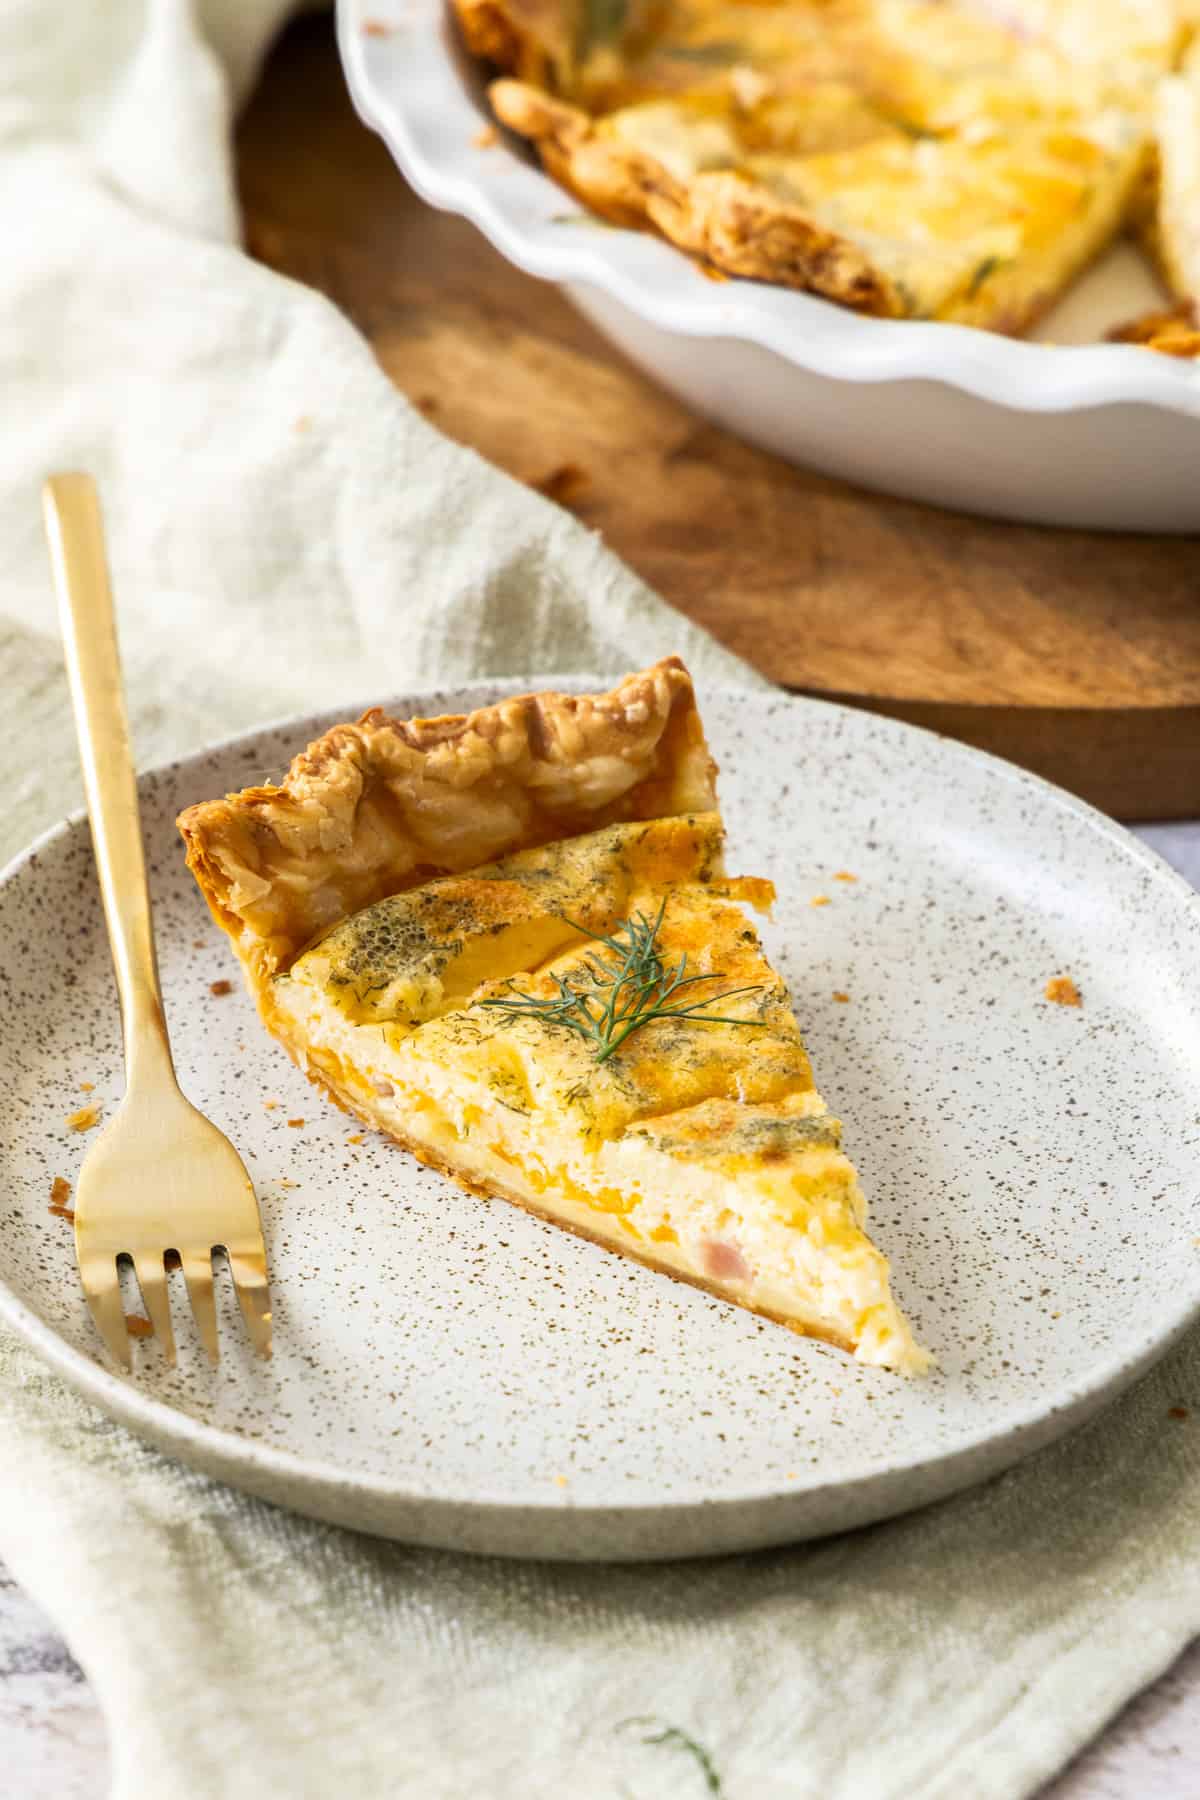 a slice of quiche on a plate with a gold fork.